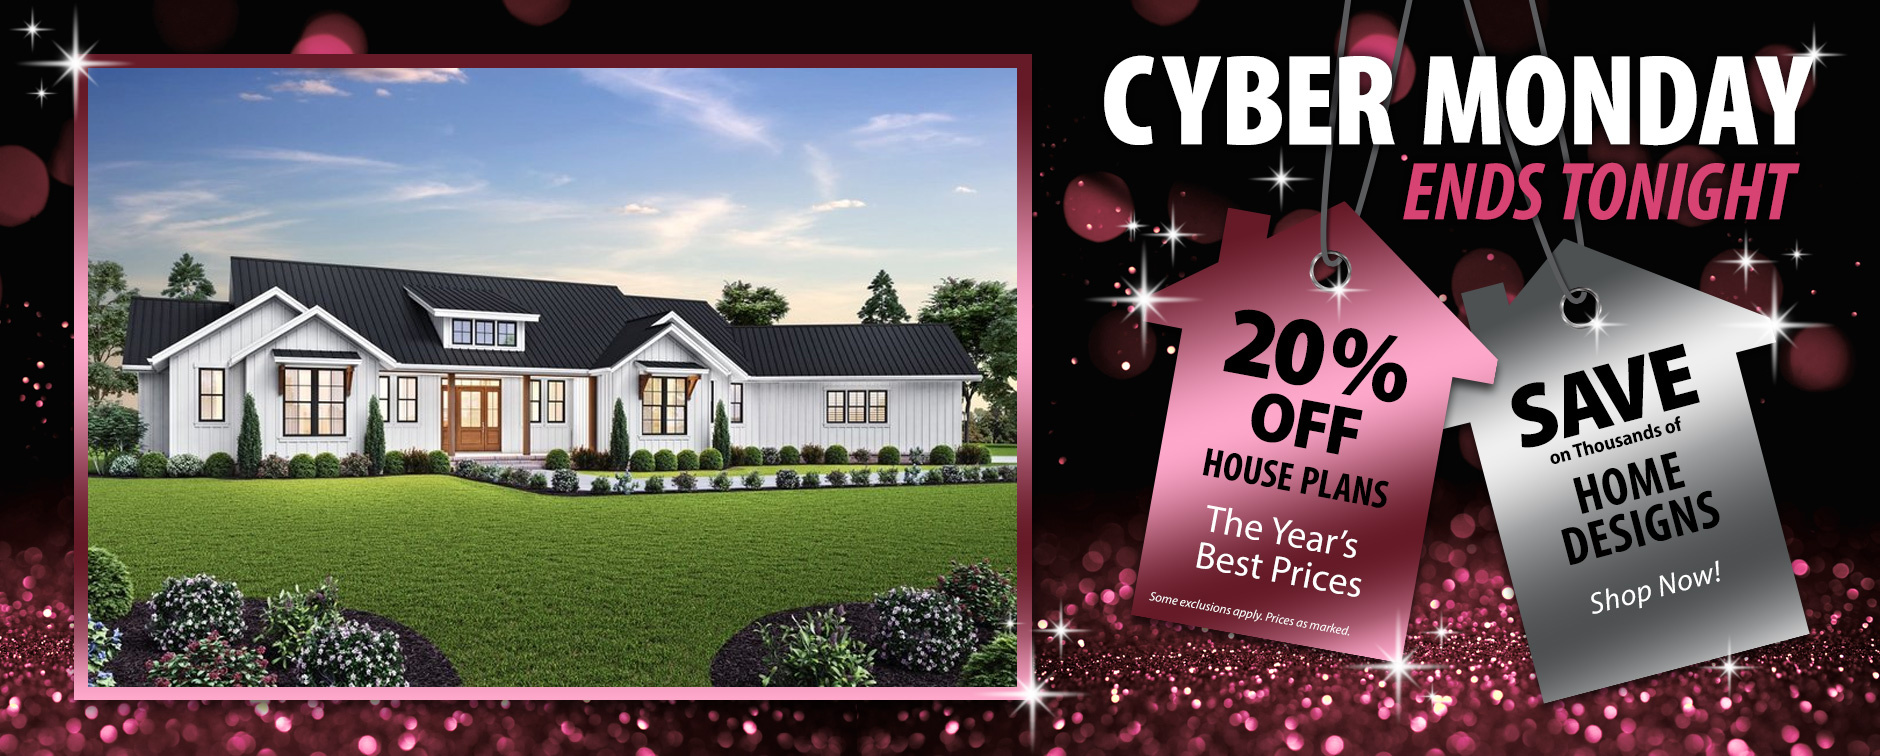 Shop Now & Take 20% Off House Plans. Offer Ends Tonight.